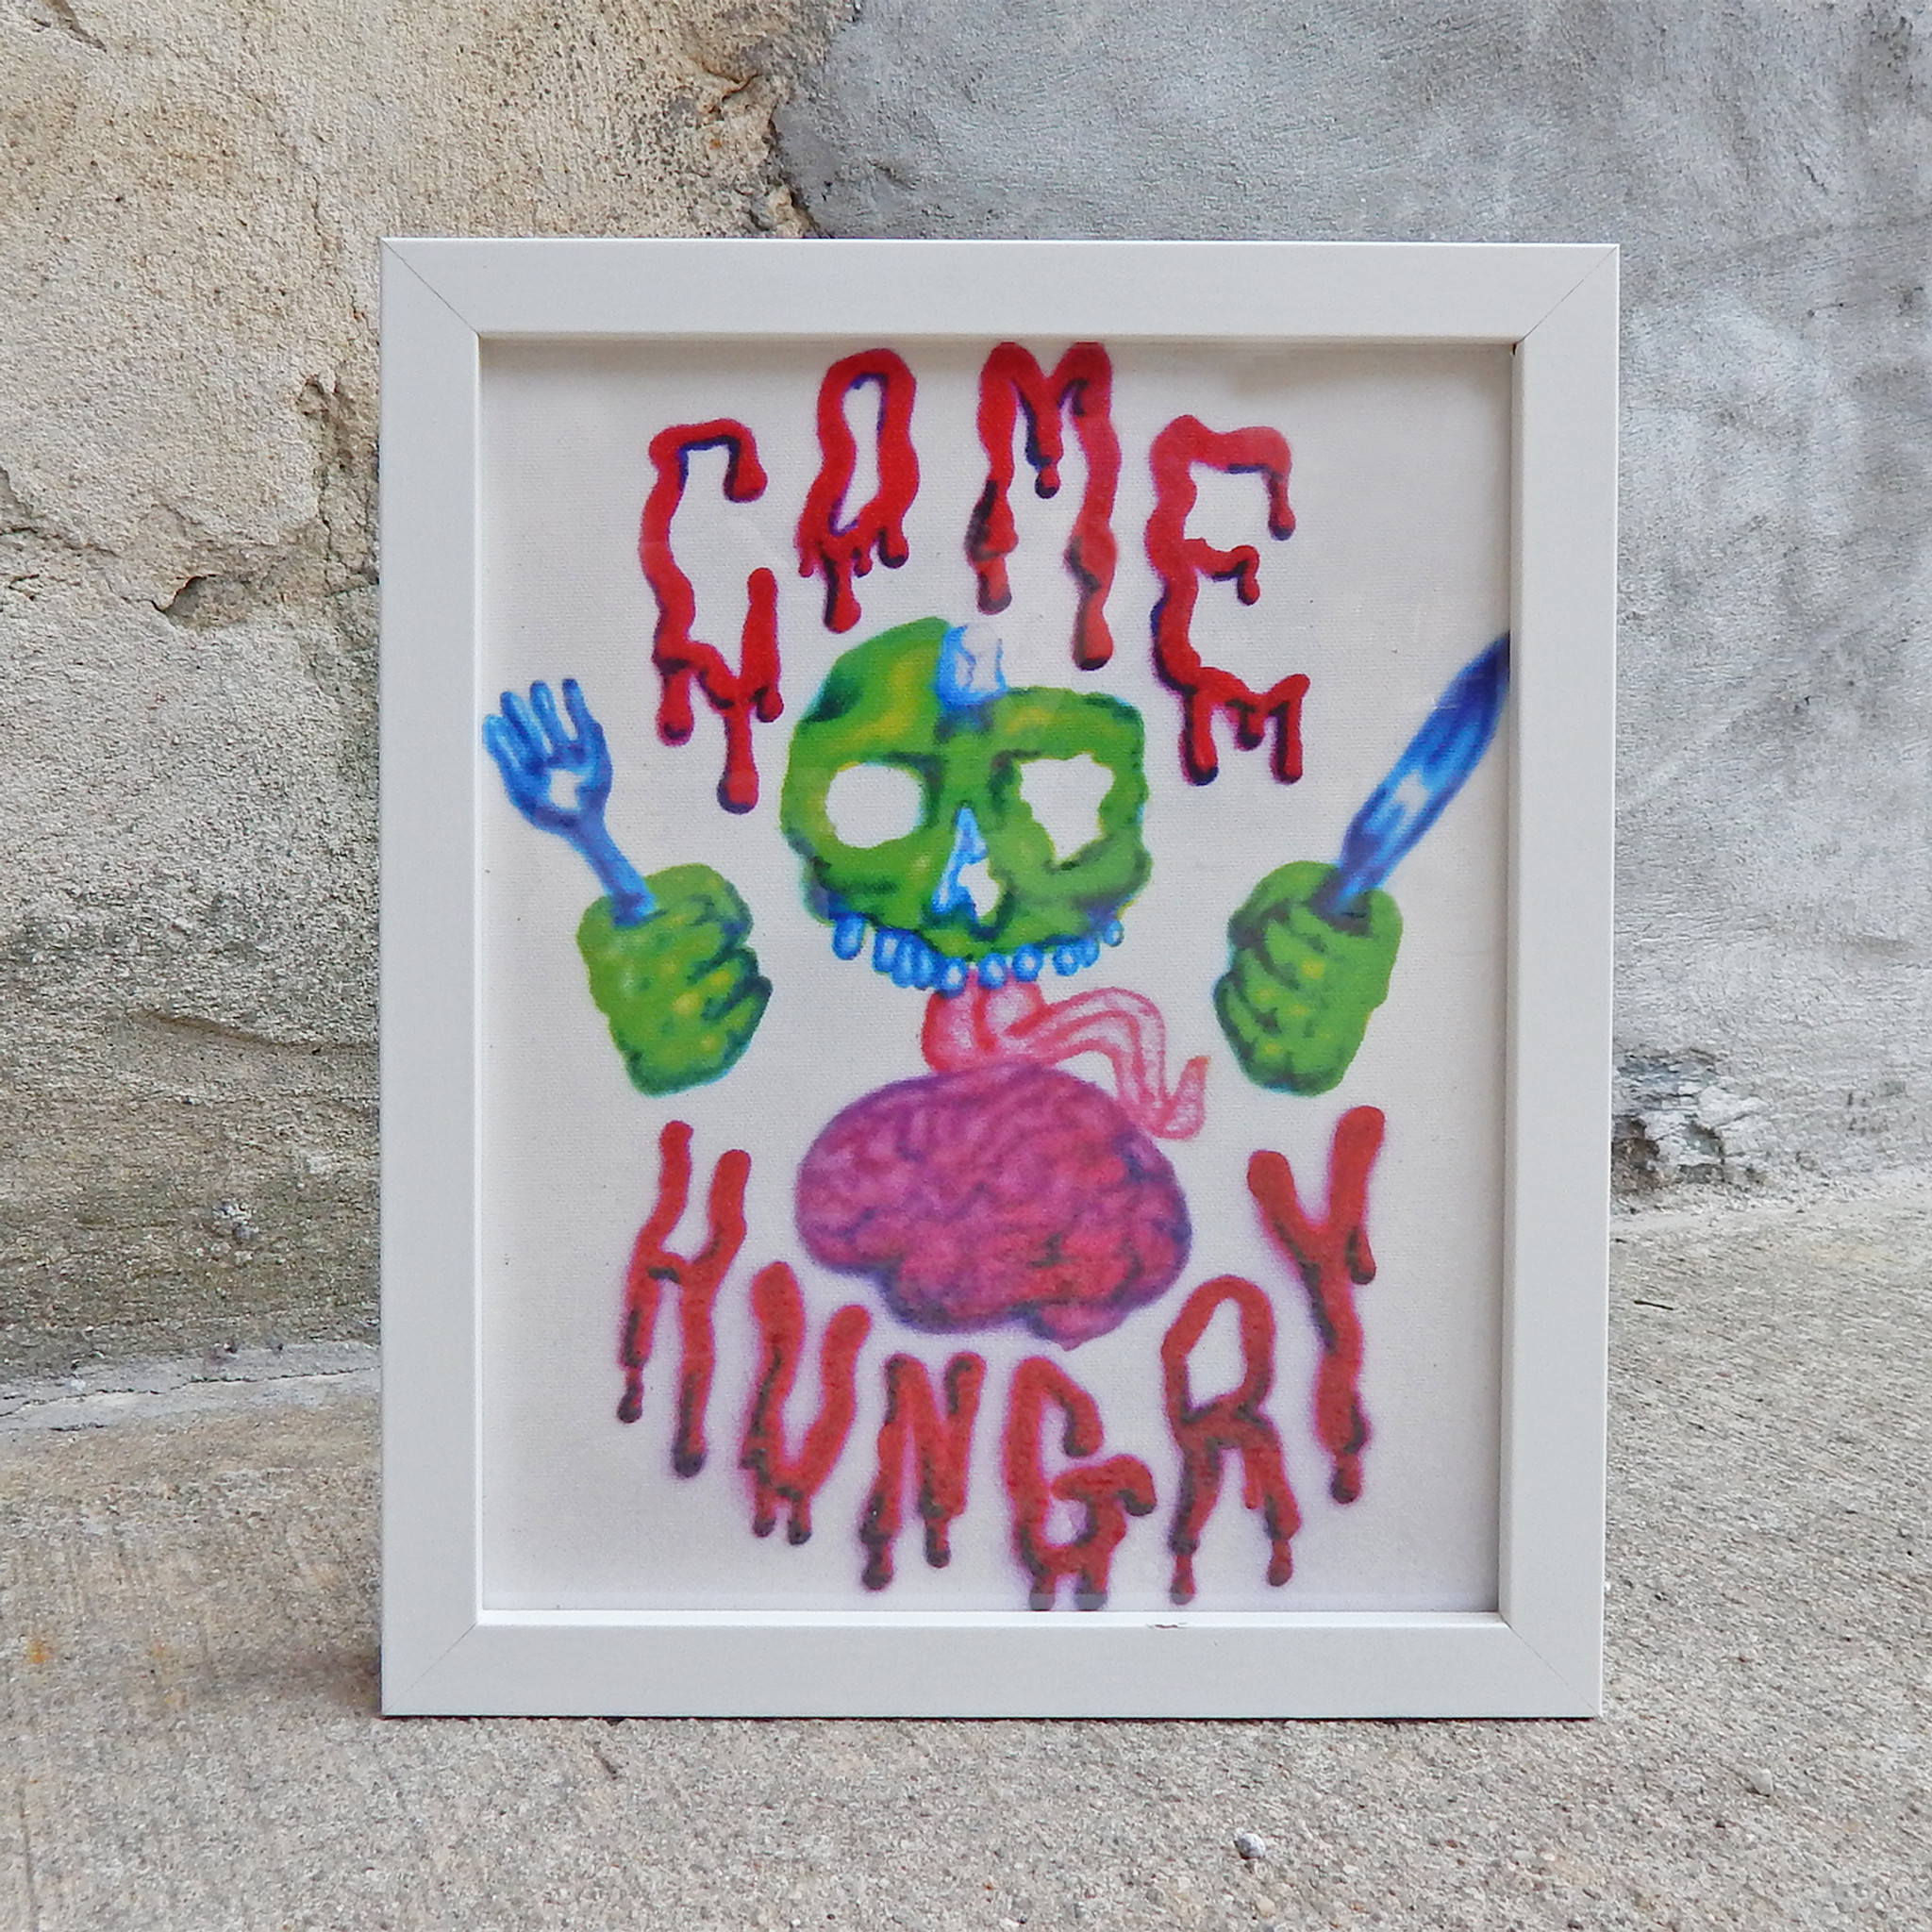 Come Hungry Print Made By Violet Bordin